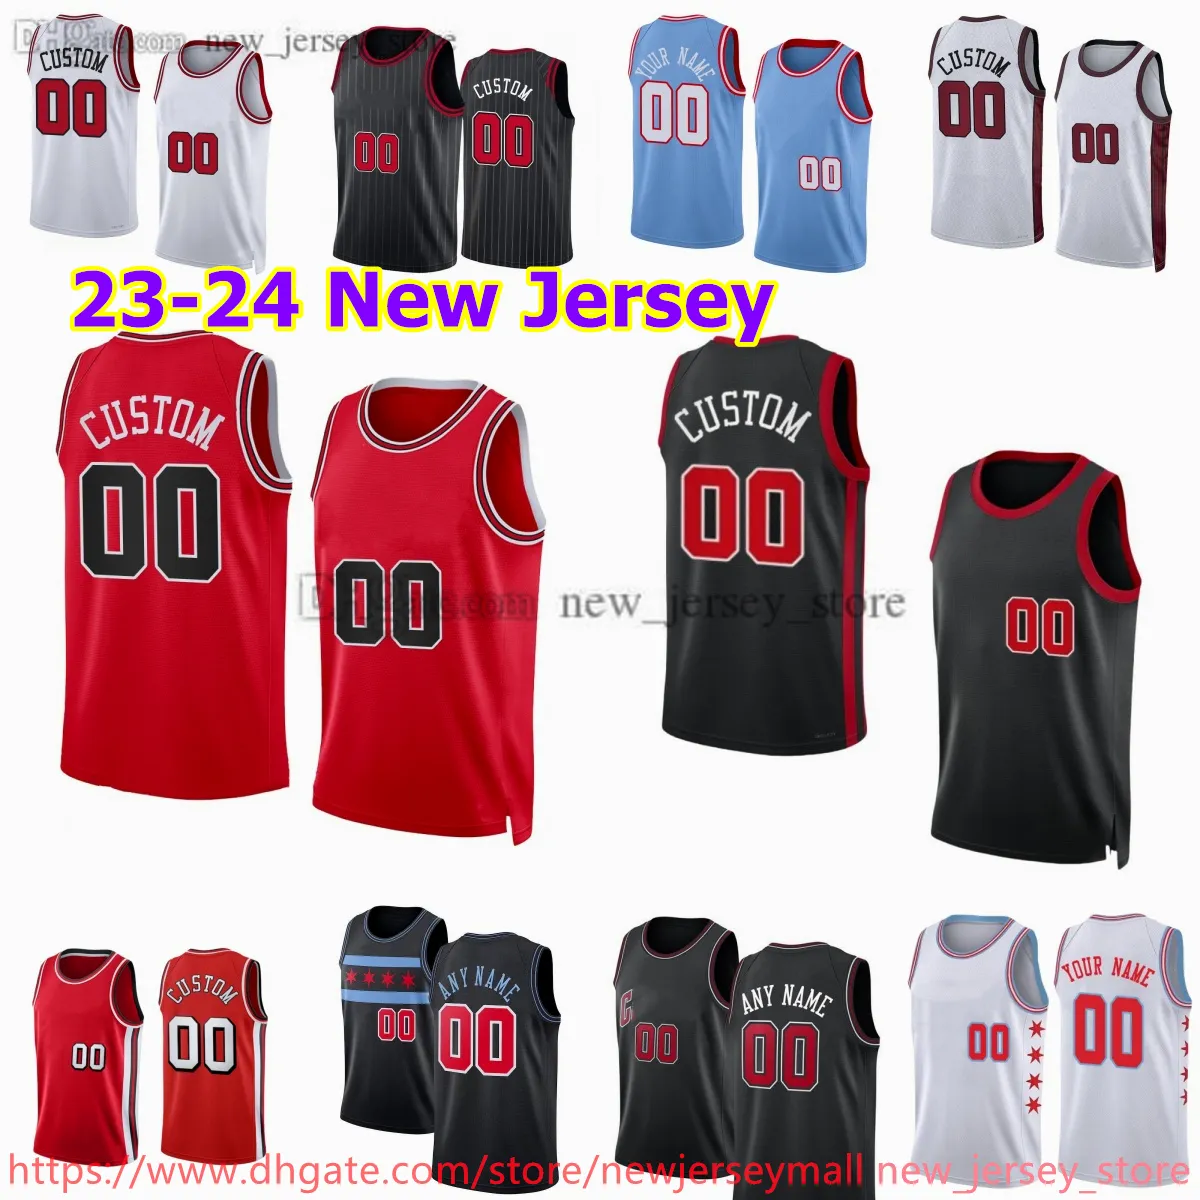 Custom 2022-23 New season Printed Basketball 8 ZachLaVine Jersey Red white black Jerseys. Message Any number and name on the order